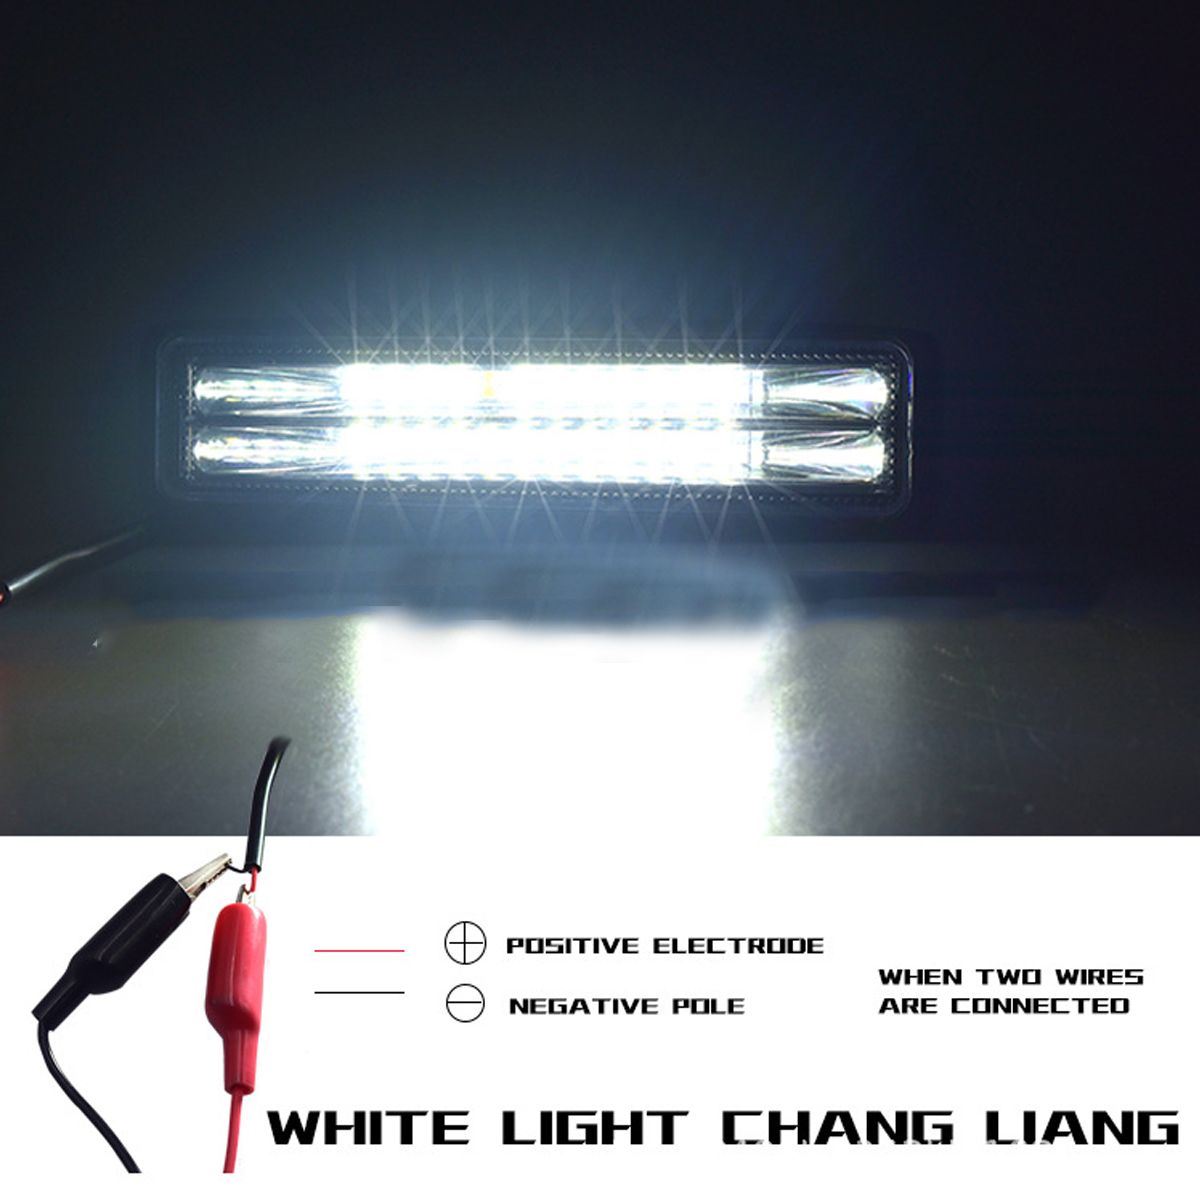 72W-Double-Row-LED-Work-Light-Bar-Fog-Light-9-32V-for-Motocycle-Offroad-Tractors-Trucks-Cars-1687485